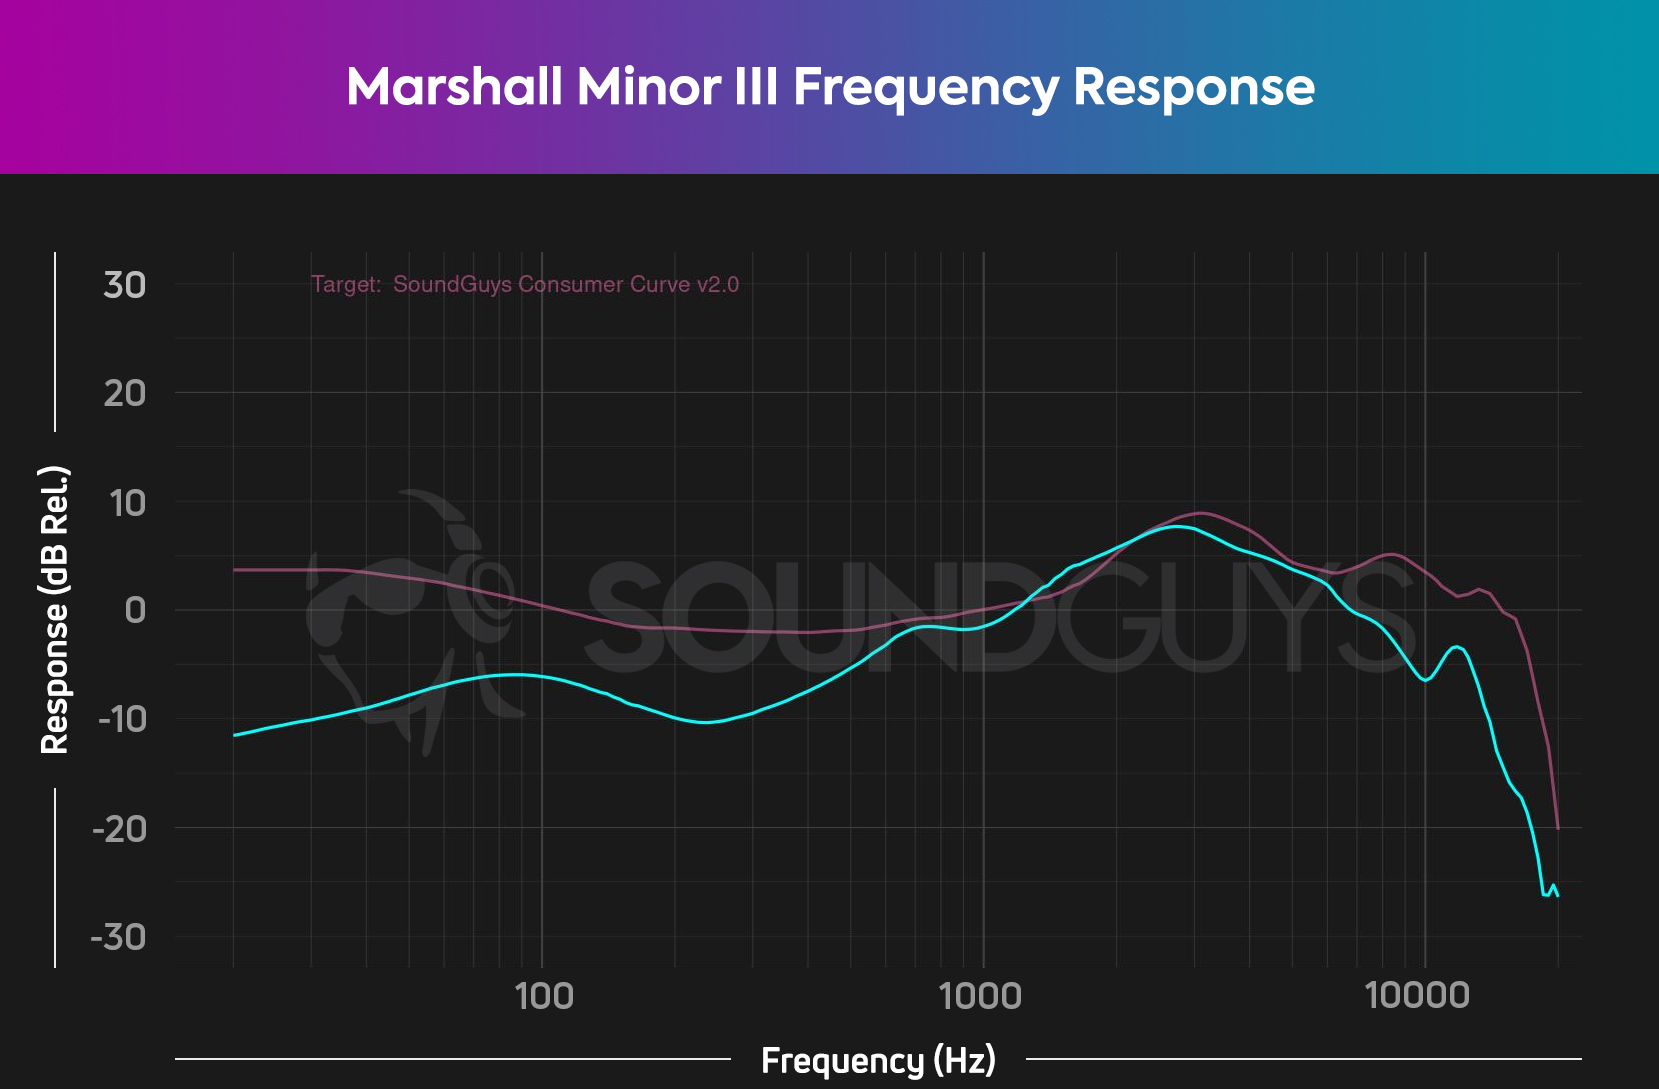 How to - Minor III - Pair a new device – Marshall